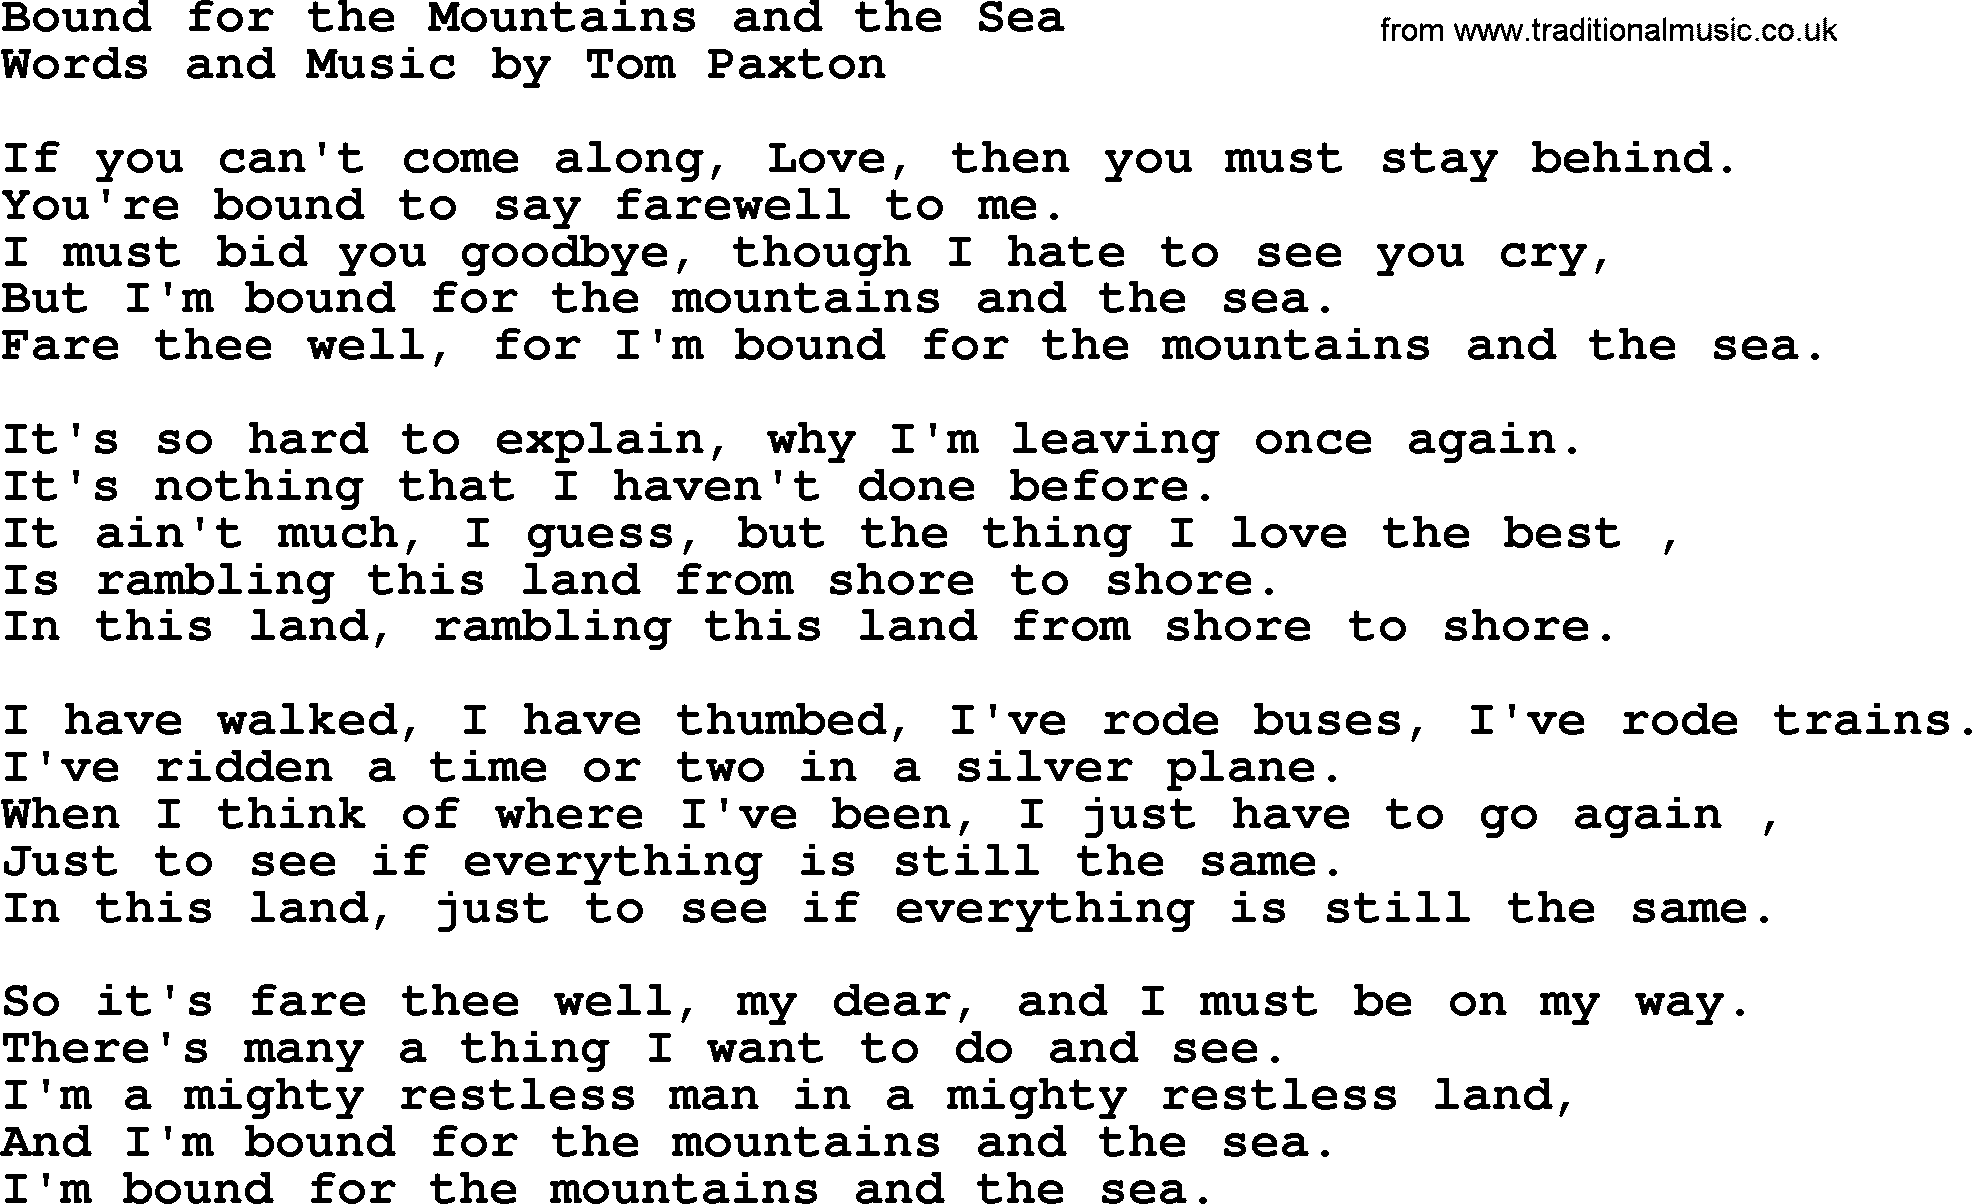 Tom Paxton song: Bound For The Mountains And The Sea, lyrics